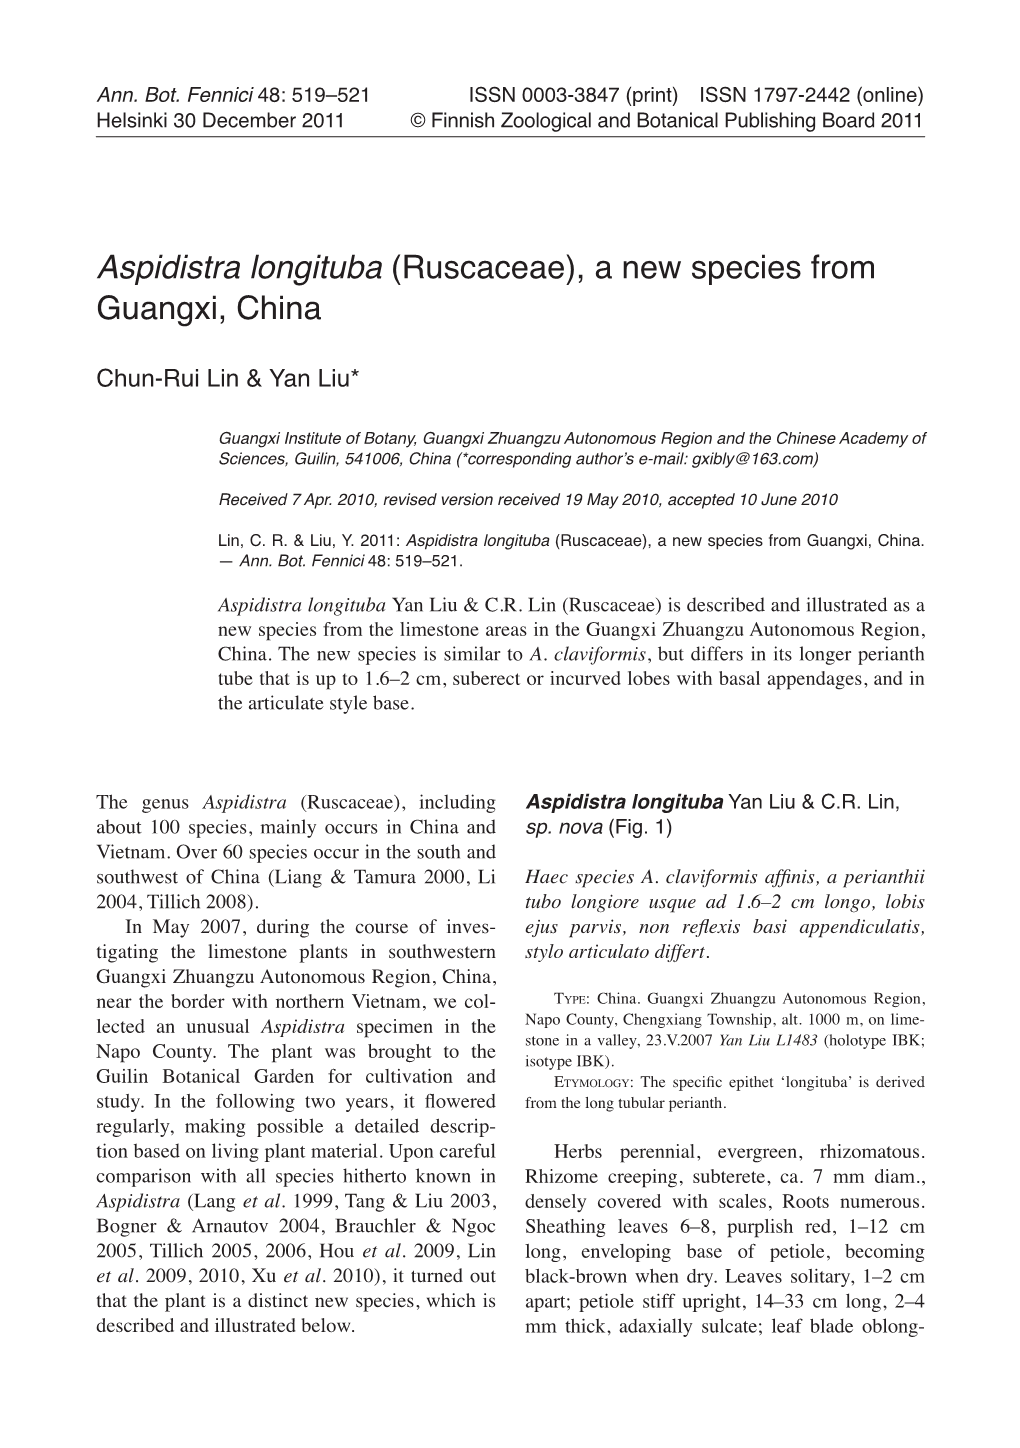 Aspidistra Longituba (Ruscaceae), a New Species from Guangxi, China